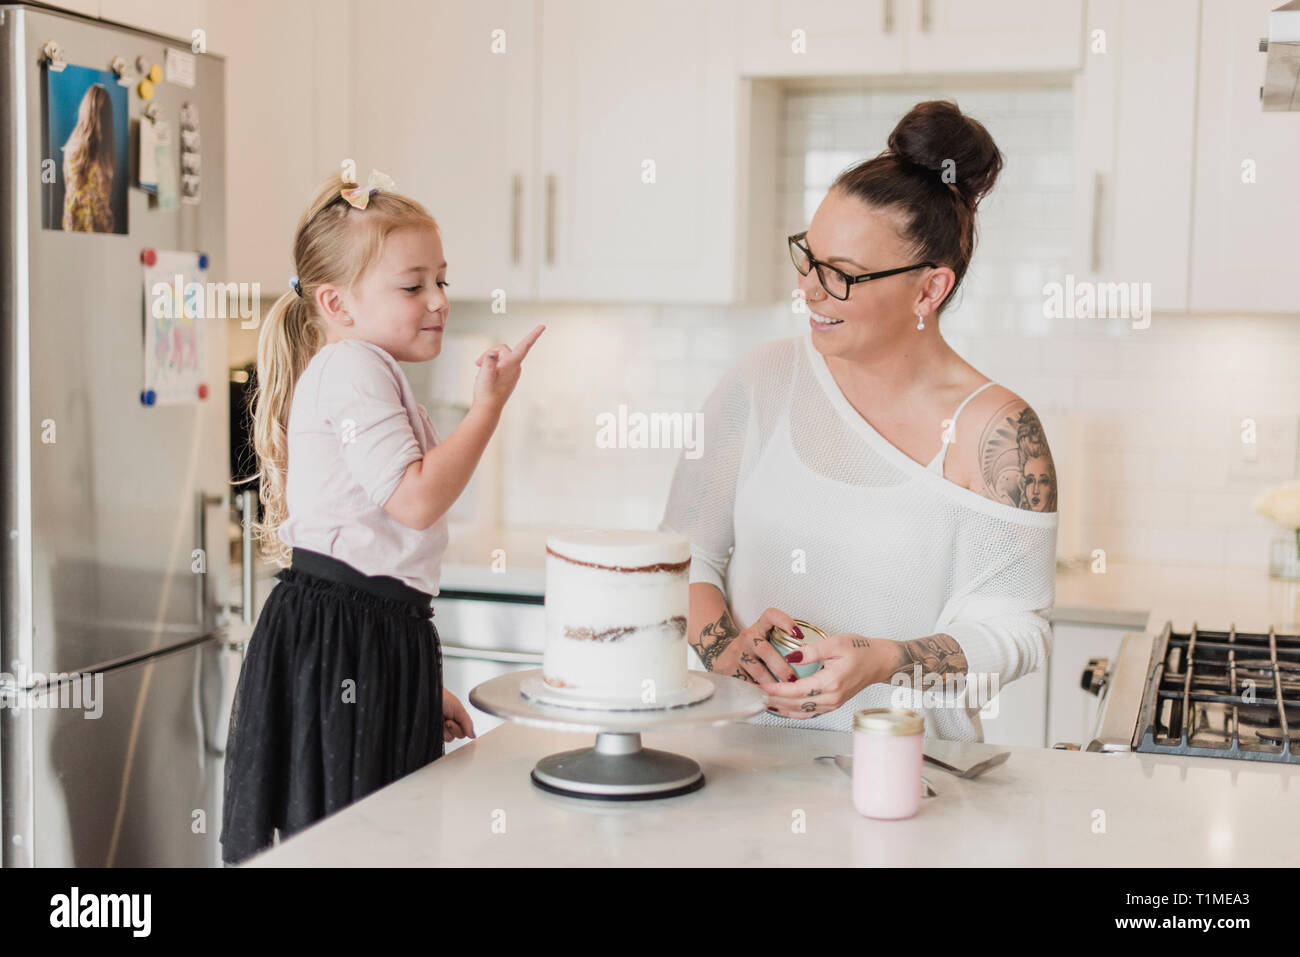 Mother and daughter decorating cake in kitchen Stock Photo